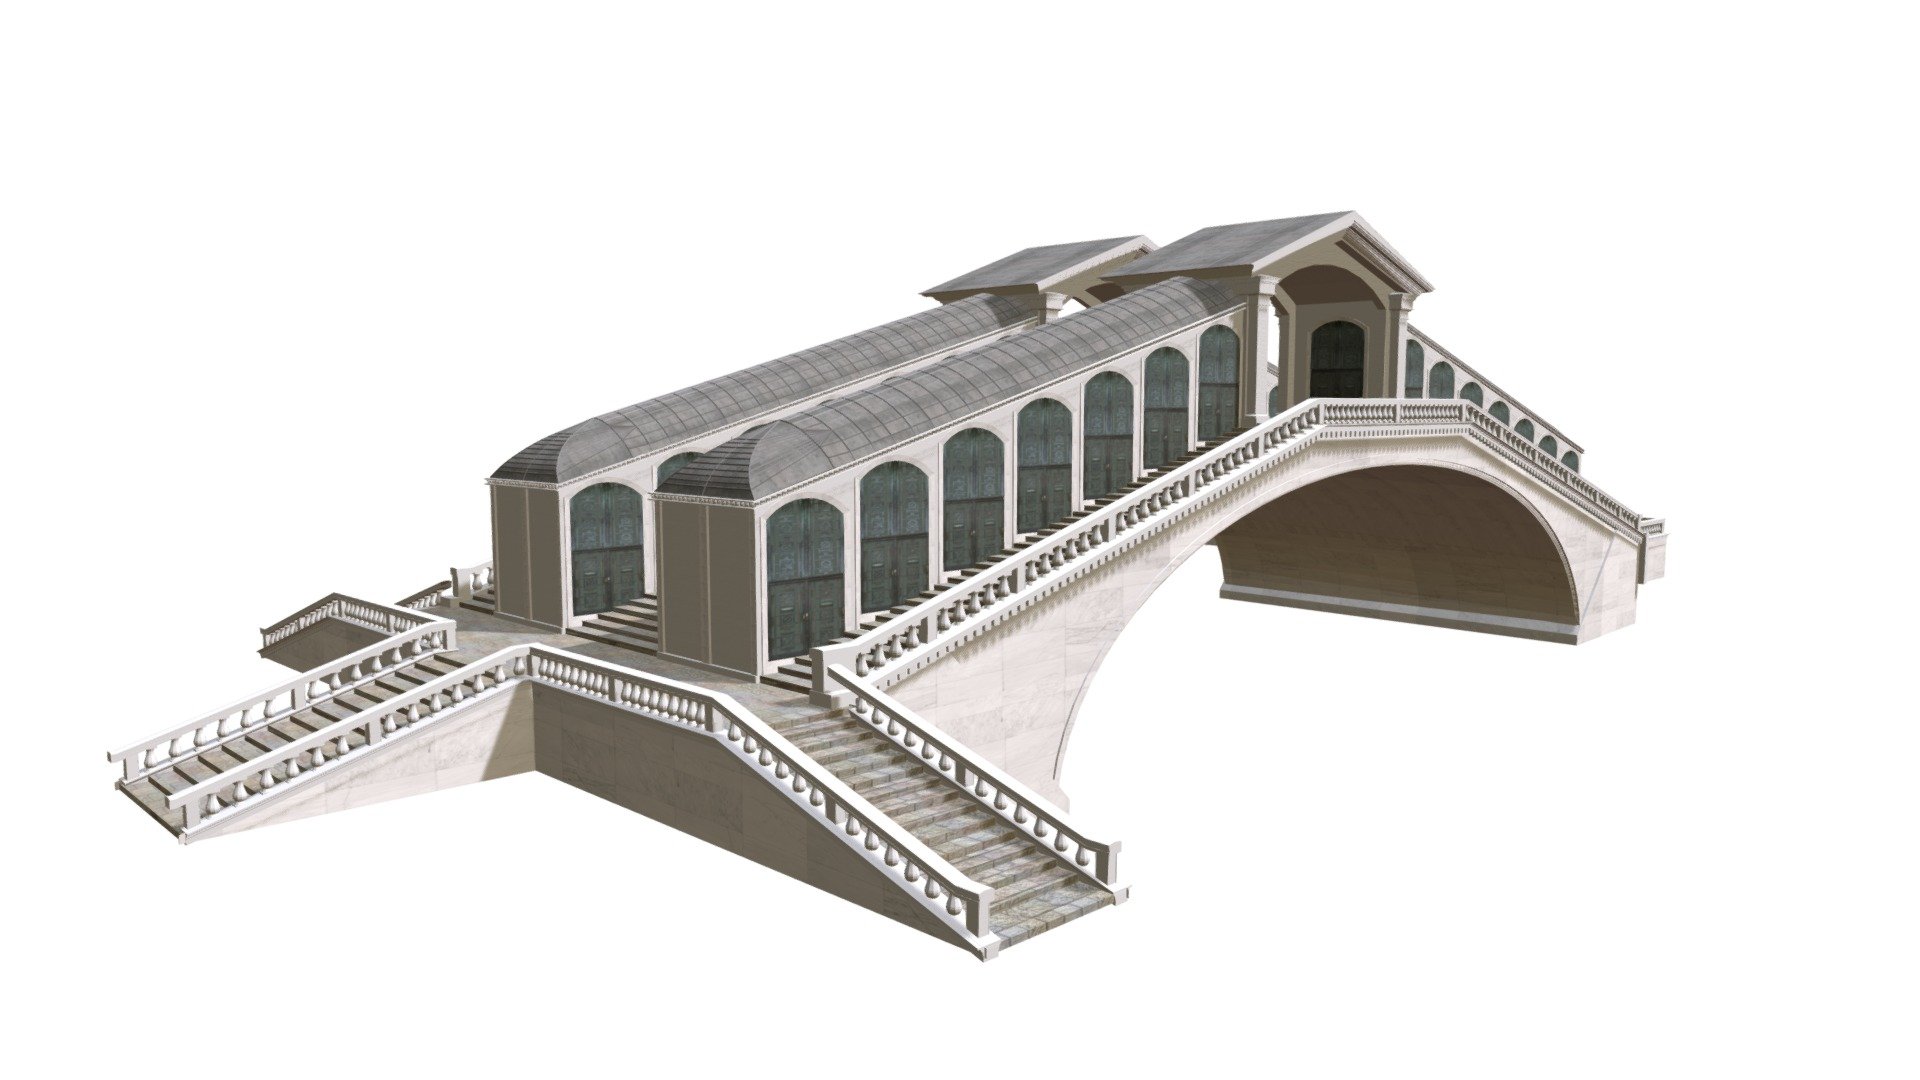 3d model of Rialto Bridge in Venice

Made in Blender

Textures and materials included and named

UV-unwrapped

Polygons/Faces : 209 395

Vertices : 223626



The Rialto Bridge is the oldest of the four bridges spanning the Grand Canal in Venice, Italy. Connecting the sestieri of San Marco and San Polo, it has been rebuilt several times since its first construction as a pontoon bridge in 1173, and is now a significant tourist attraction in the city 3d model